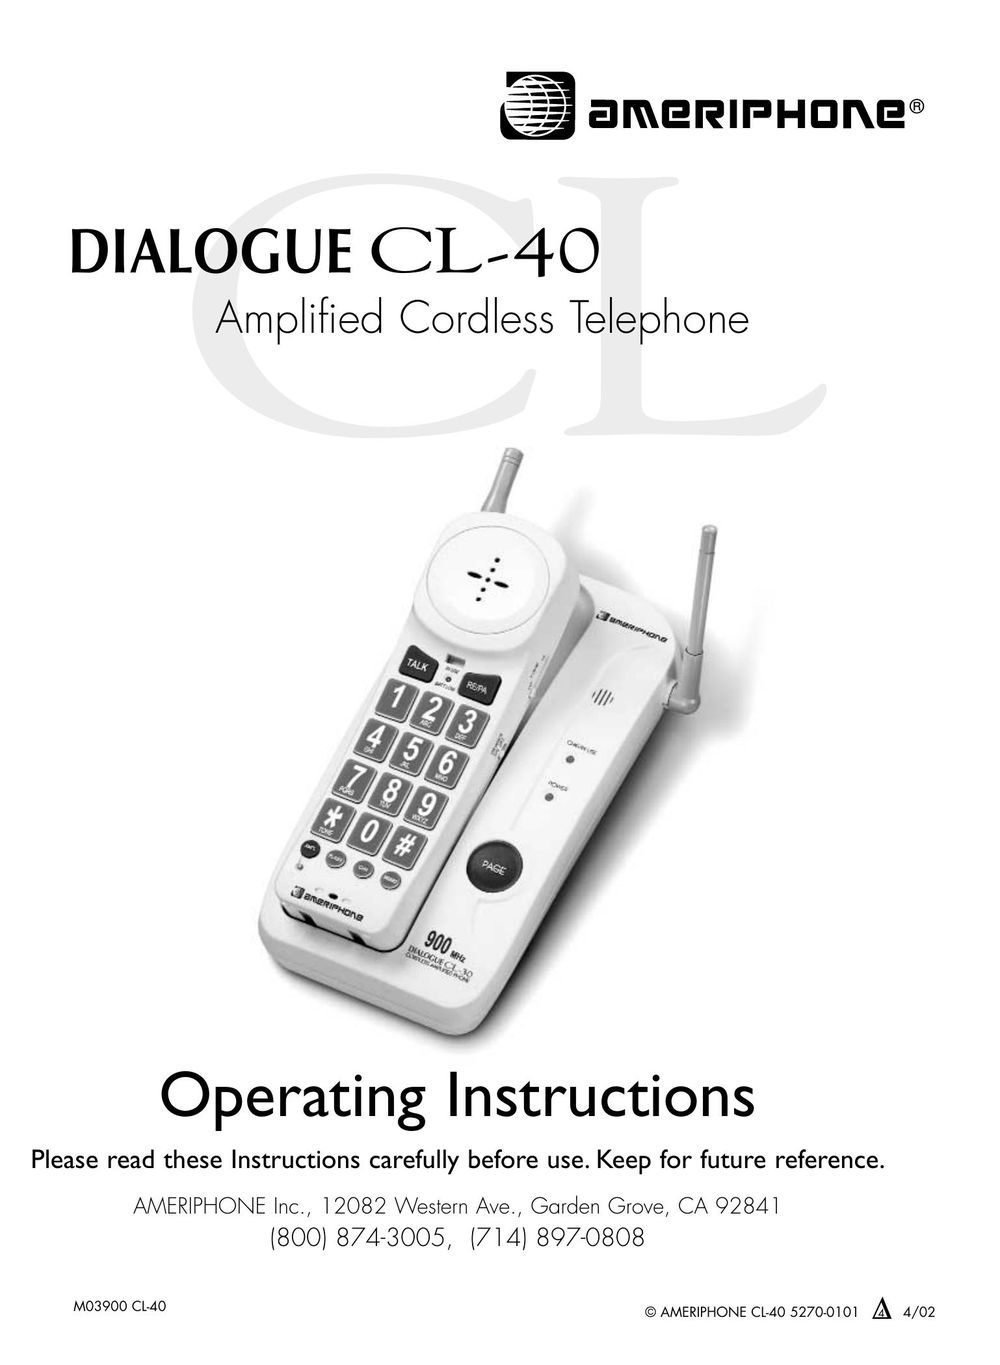 Ameriphone CL-40 Cordless Telephone User Manual (Page 1)